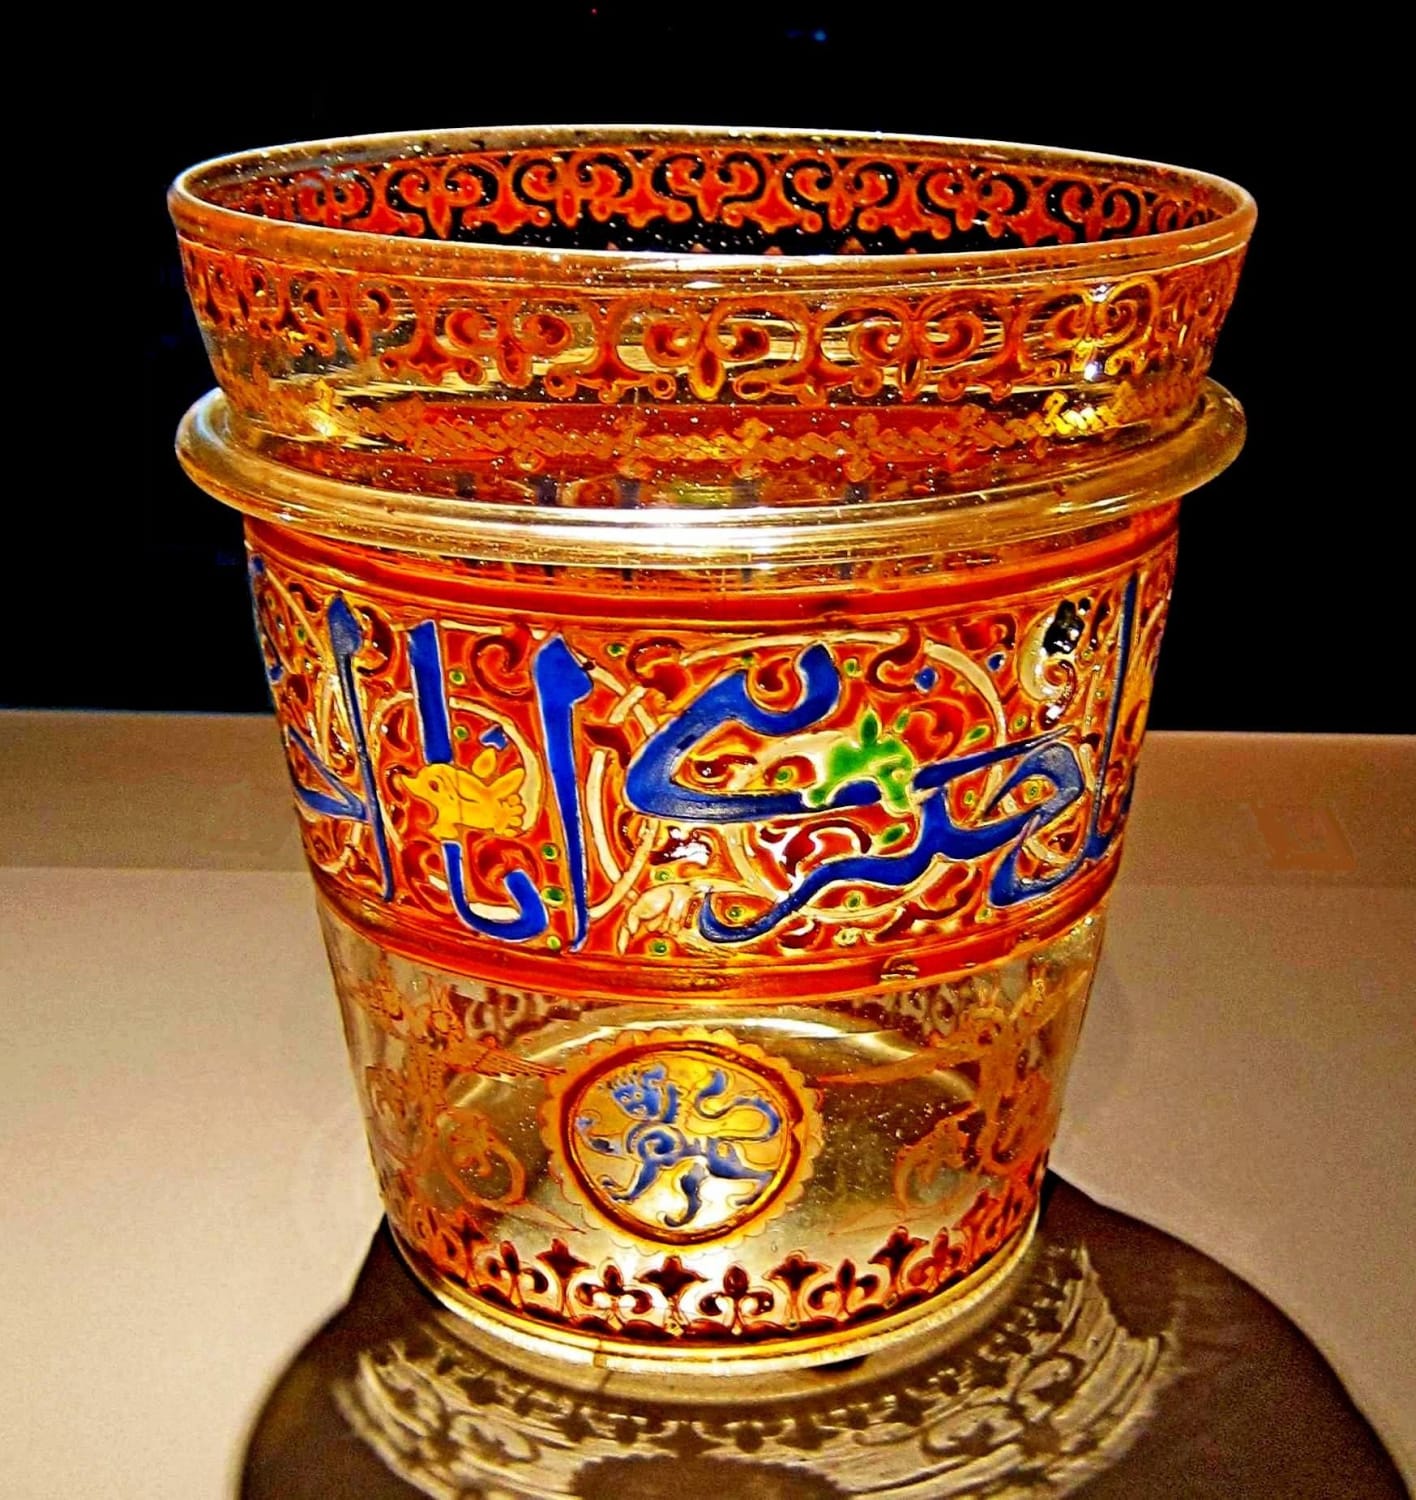 A Mamluk enamelled glass bucket made either in Egypt or Syria. Mid 14th century CE, it was sold at sotheby's in 2009 and is now in the permanent collection of the Museum of Islamic Art in Doha, Qatar